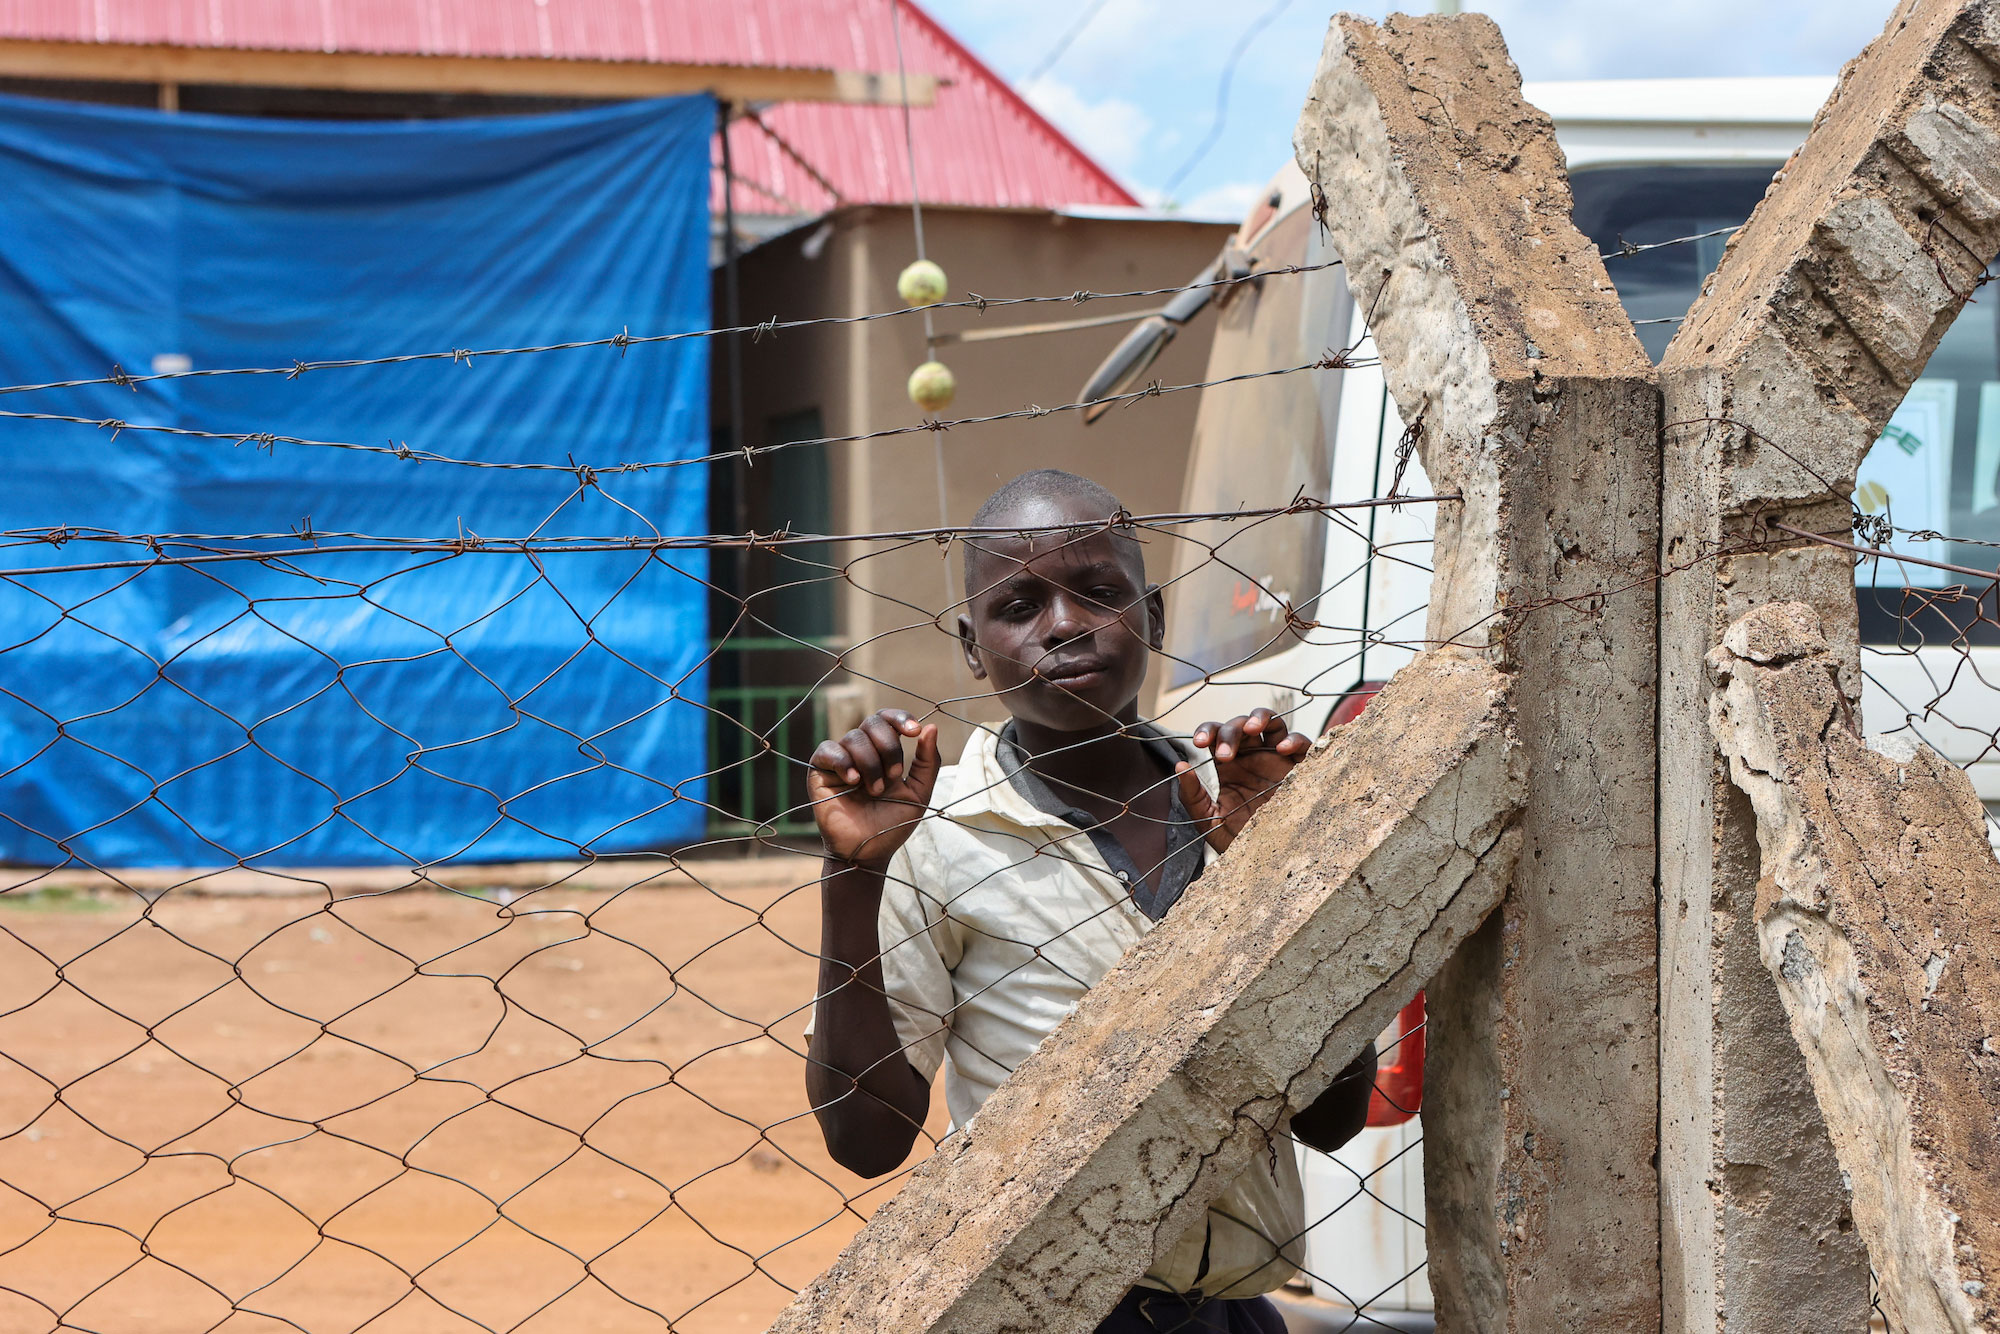 Tanzanian child looks at camera from behind wire fence